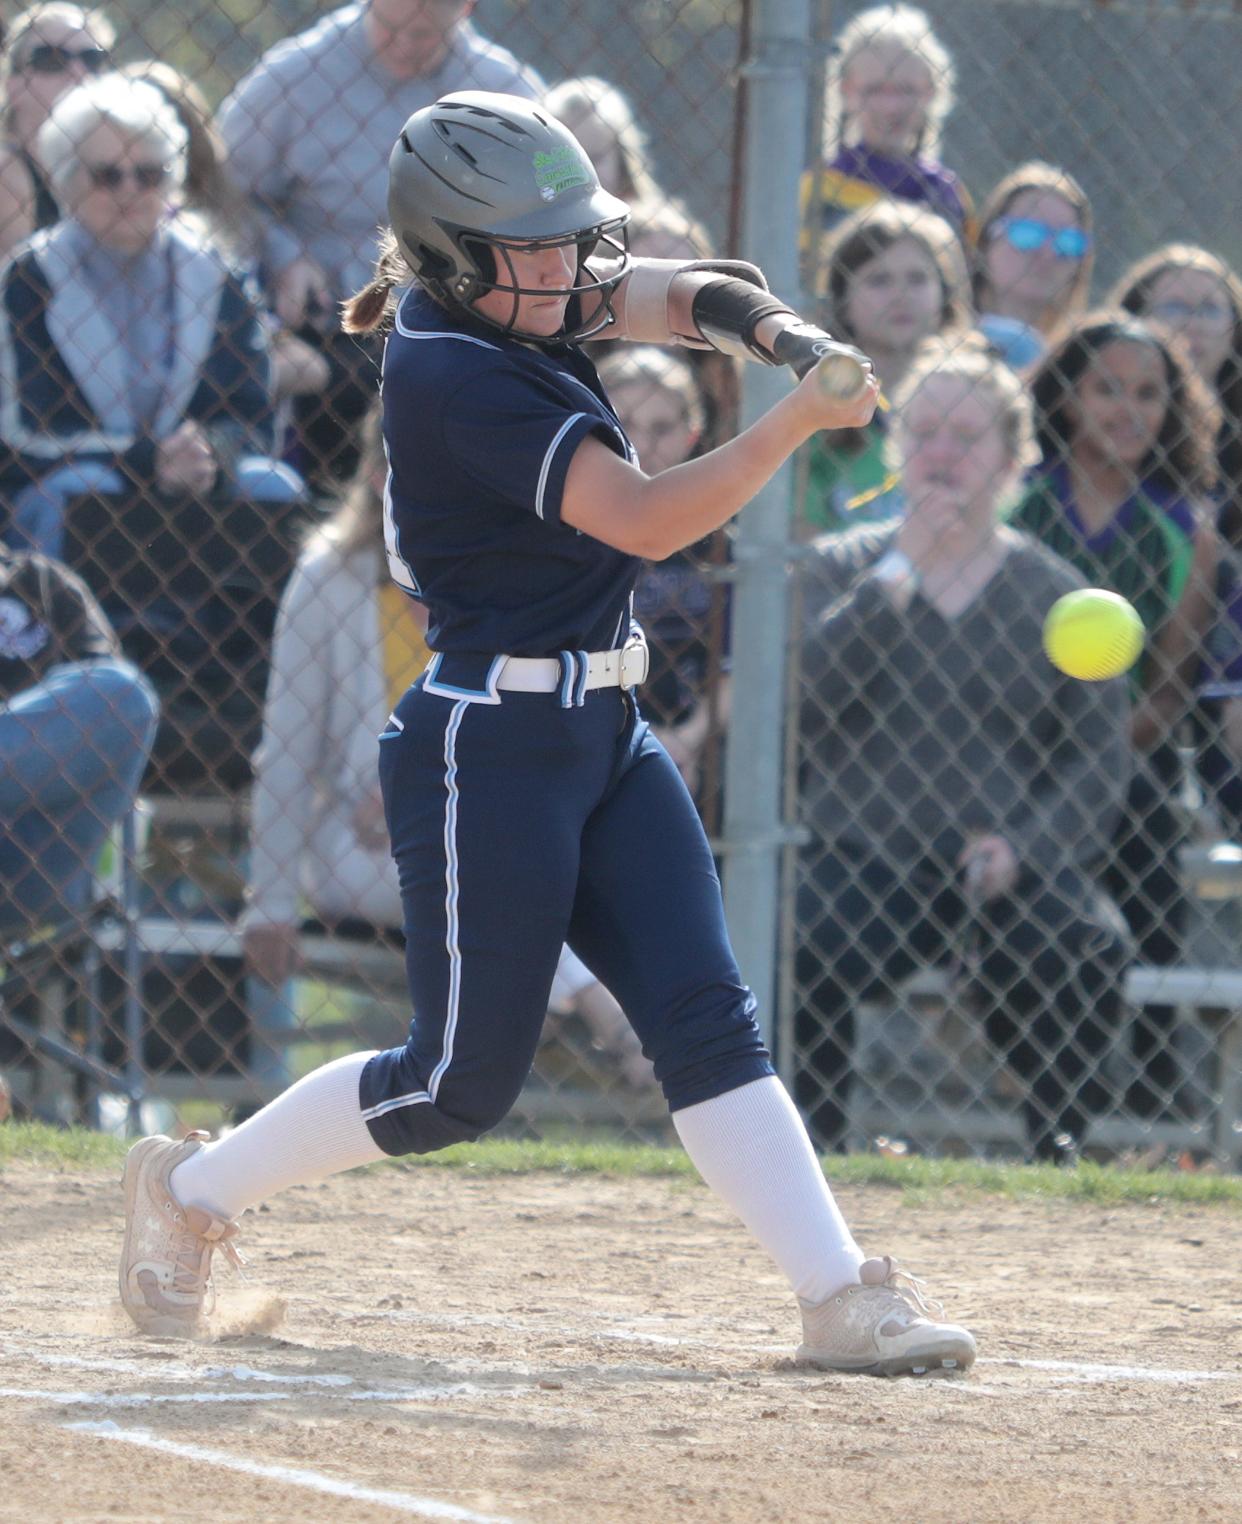 Louisville's Kenzi Denzer cracks a single in the first inning against Jackson at Jackson Friday, April 29, 2022.